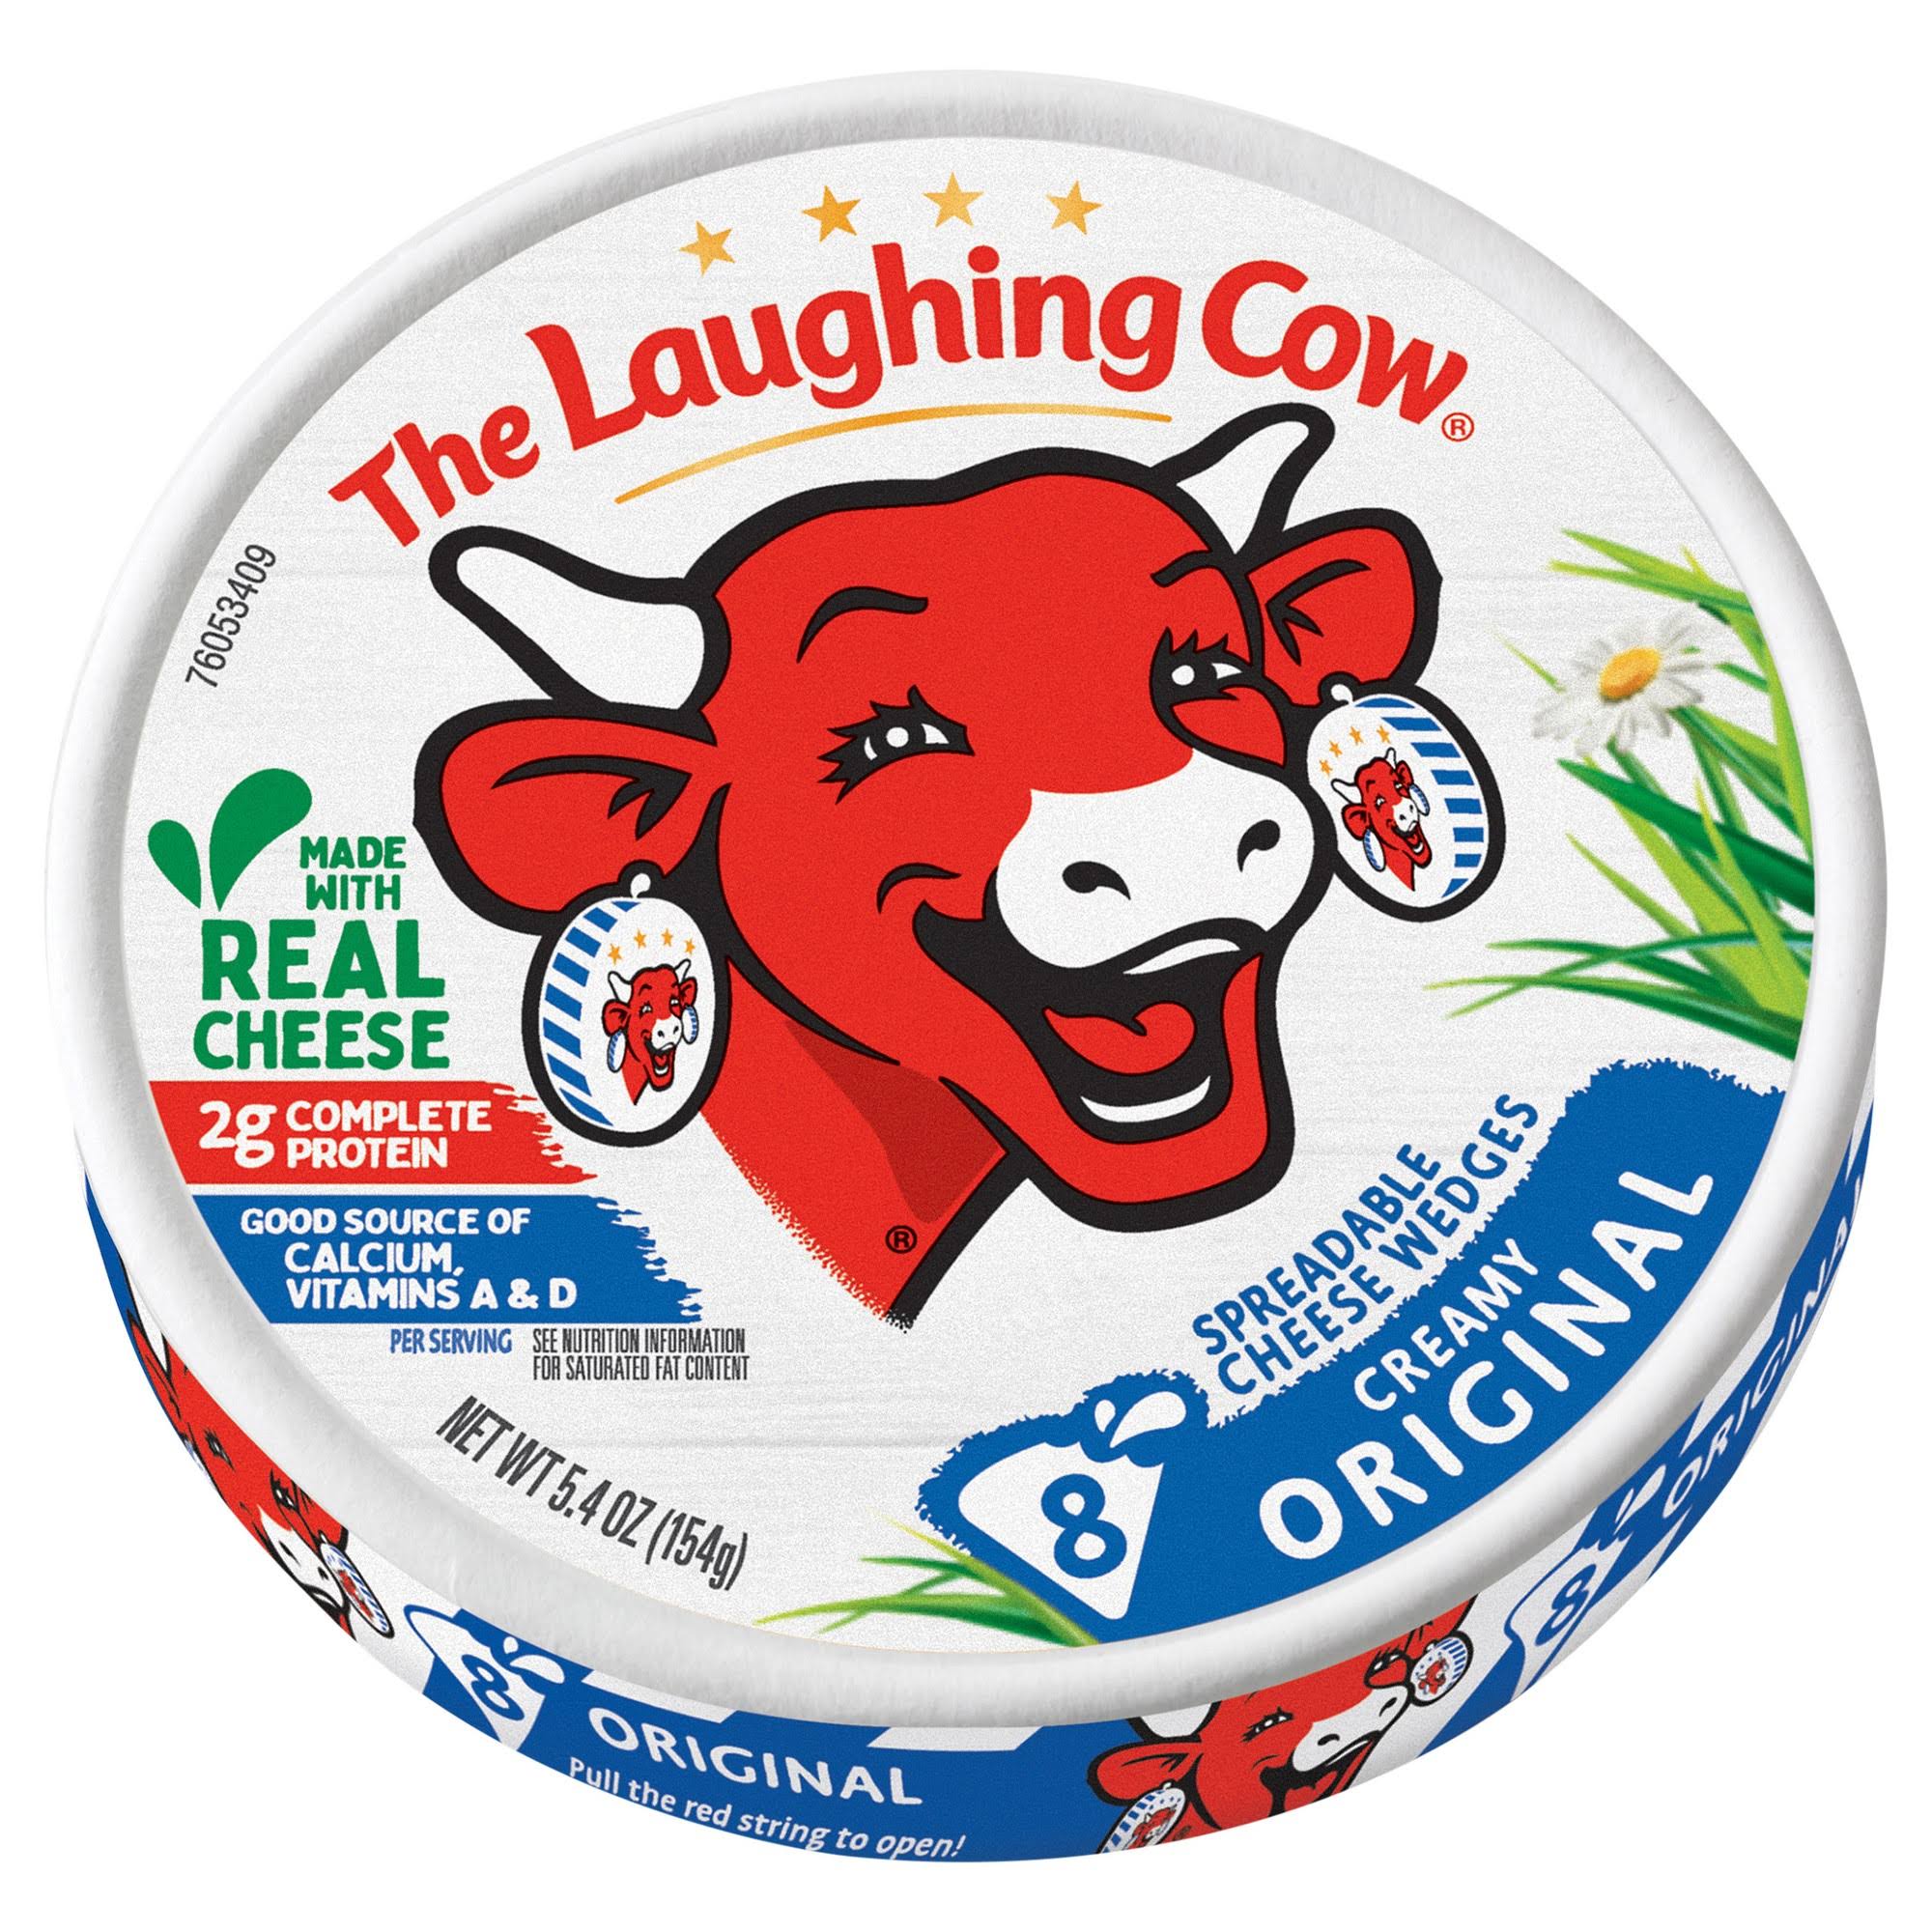 The Laughing Cow Original Spreadable Creamy Cheese Wedges